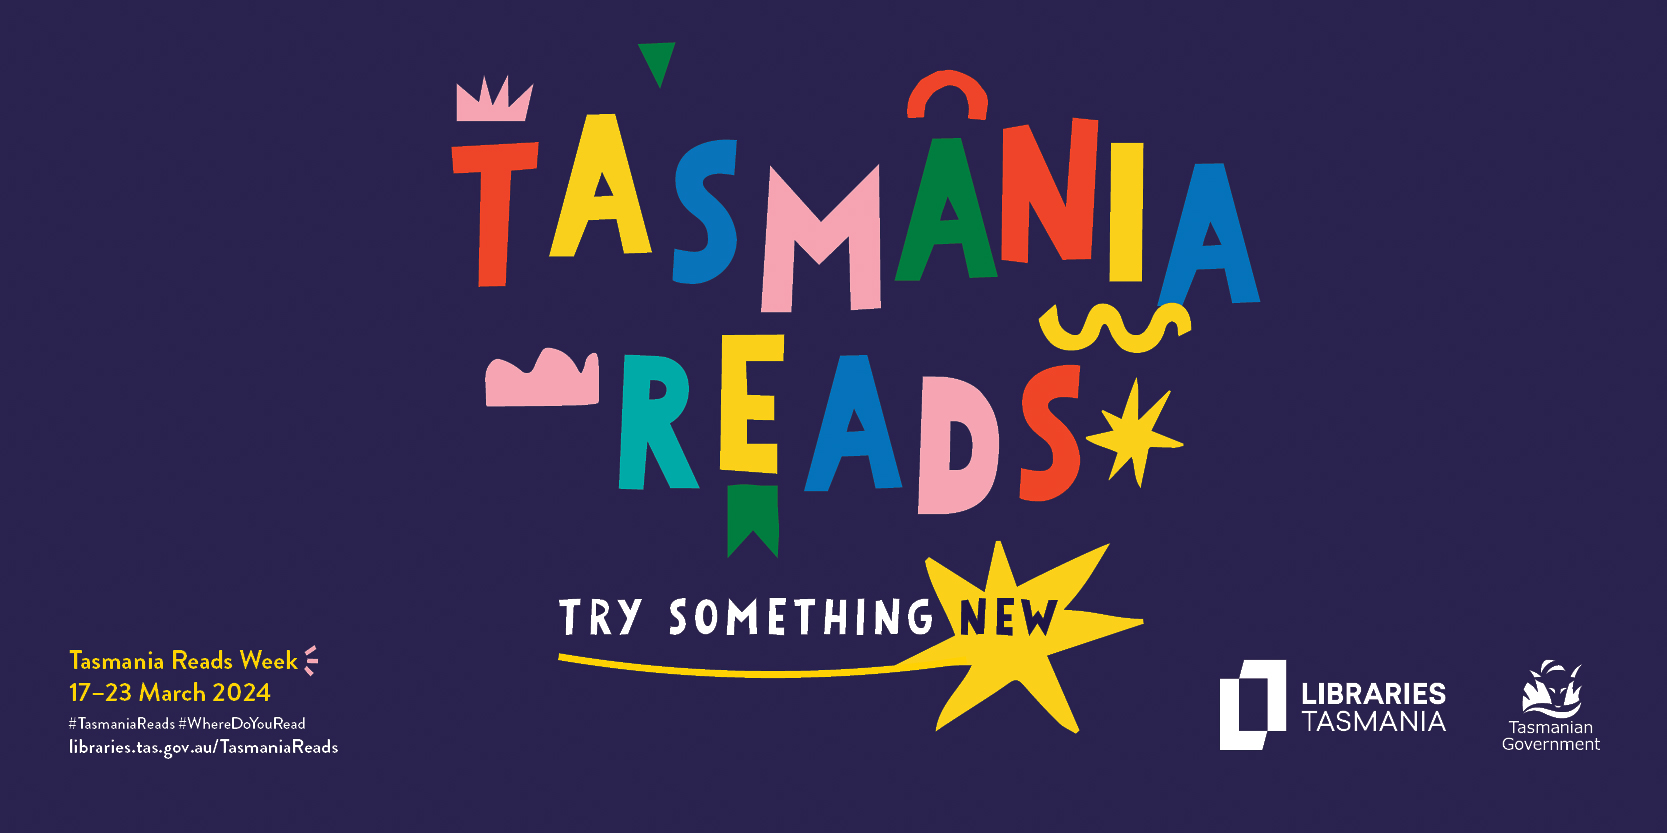 Colourful letters spelling out - TASMANIA READS Try Something New - on a dark blue background